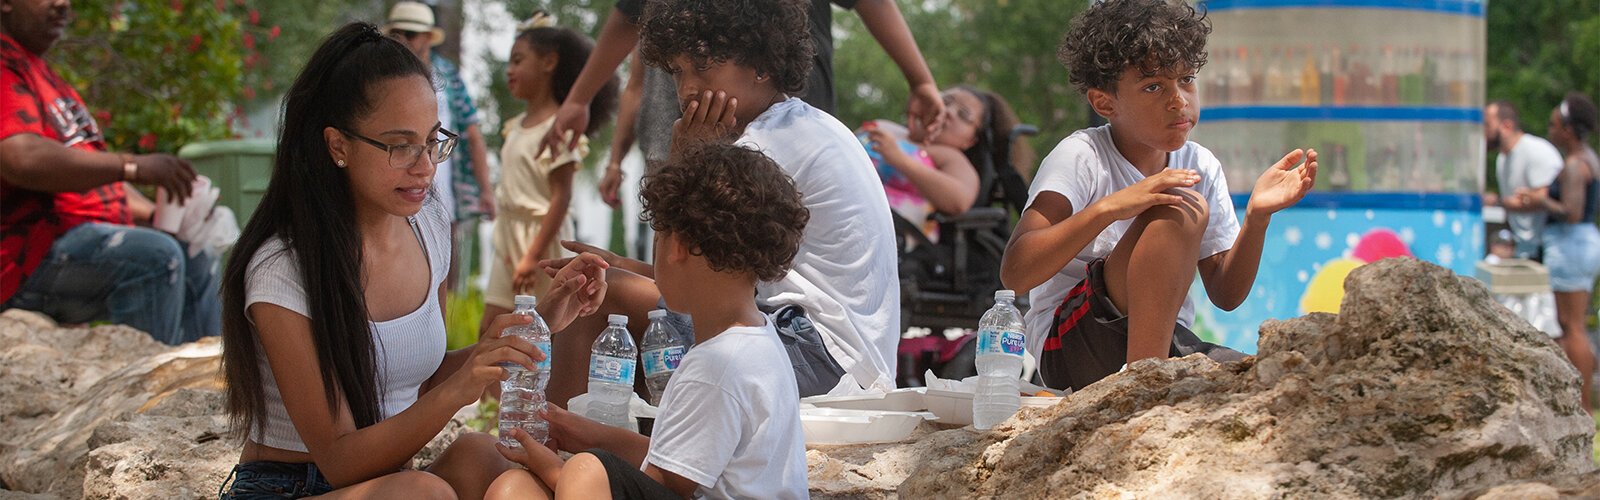 Vannesa Aguirre shares water and shade with her nephews Branden Smith, 6 (front), Hayden Smith, 11, and Landen Smith, 7, at the Multicultural Family Day event at Water Works Park on Sunday.